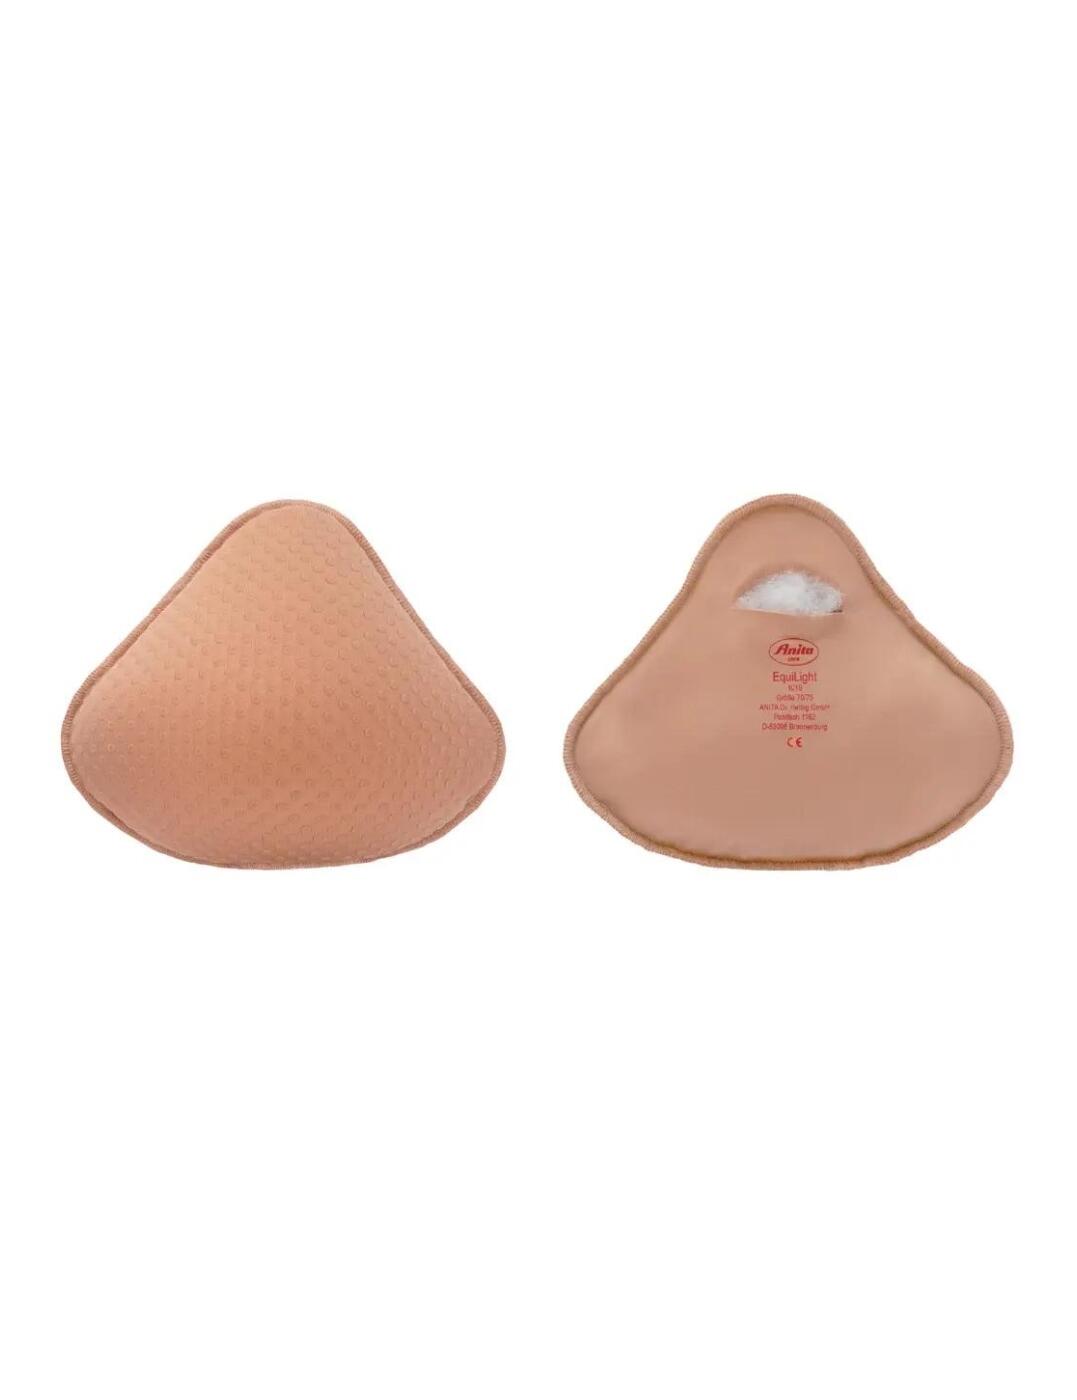 Anita Care EquiLight Textile Breast Form Deep Sand